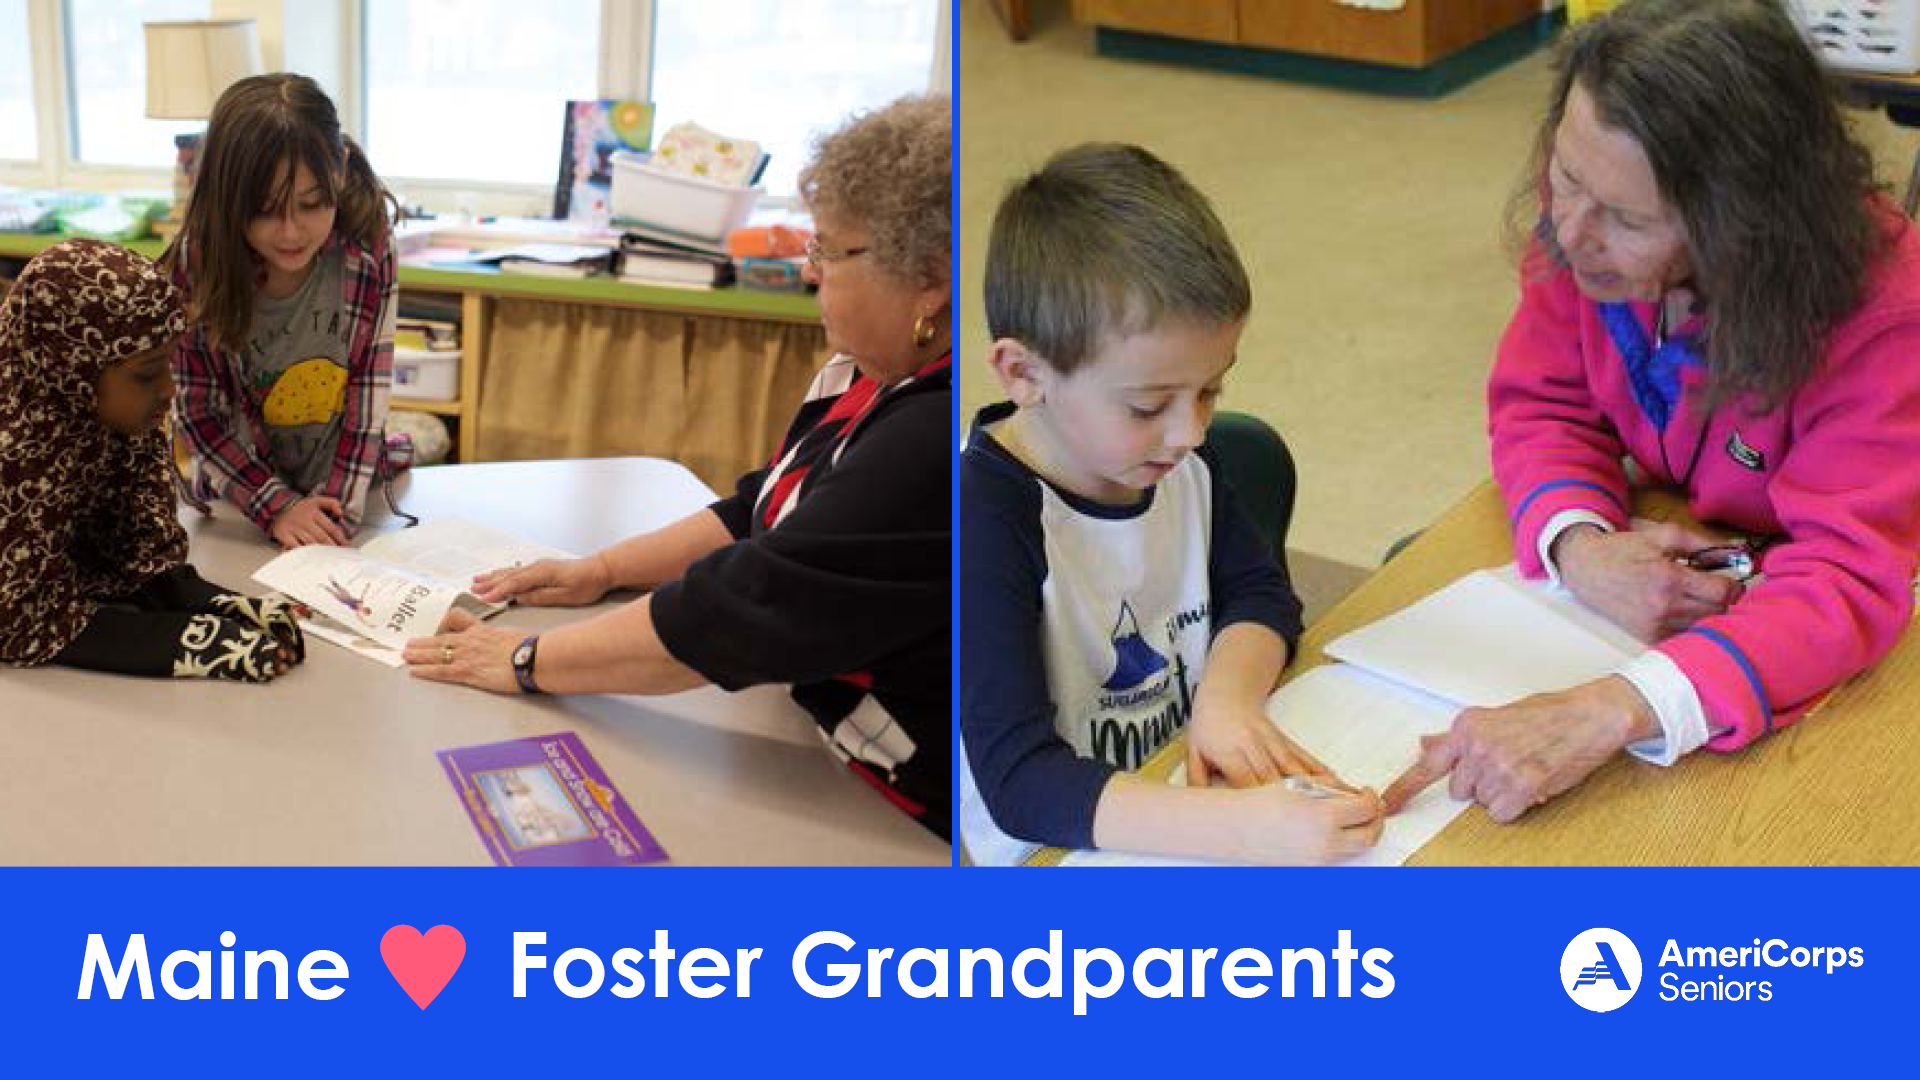 "Decorative graphic featuring two different photos of volunteers reading to students in a classroom setting.